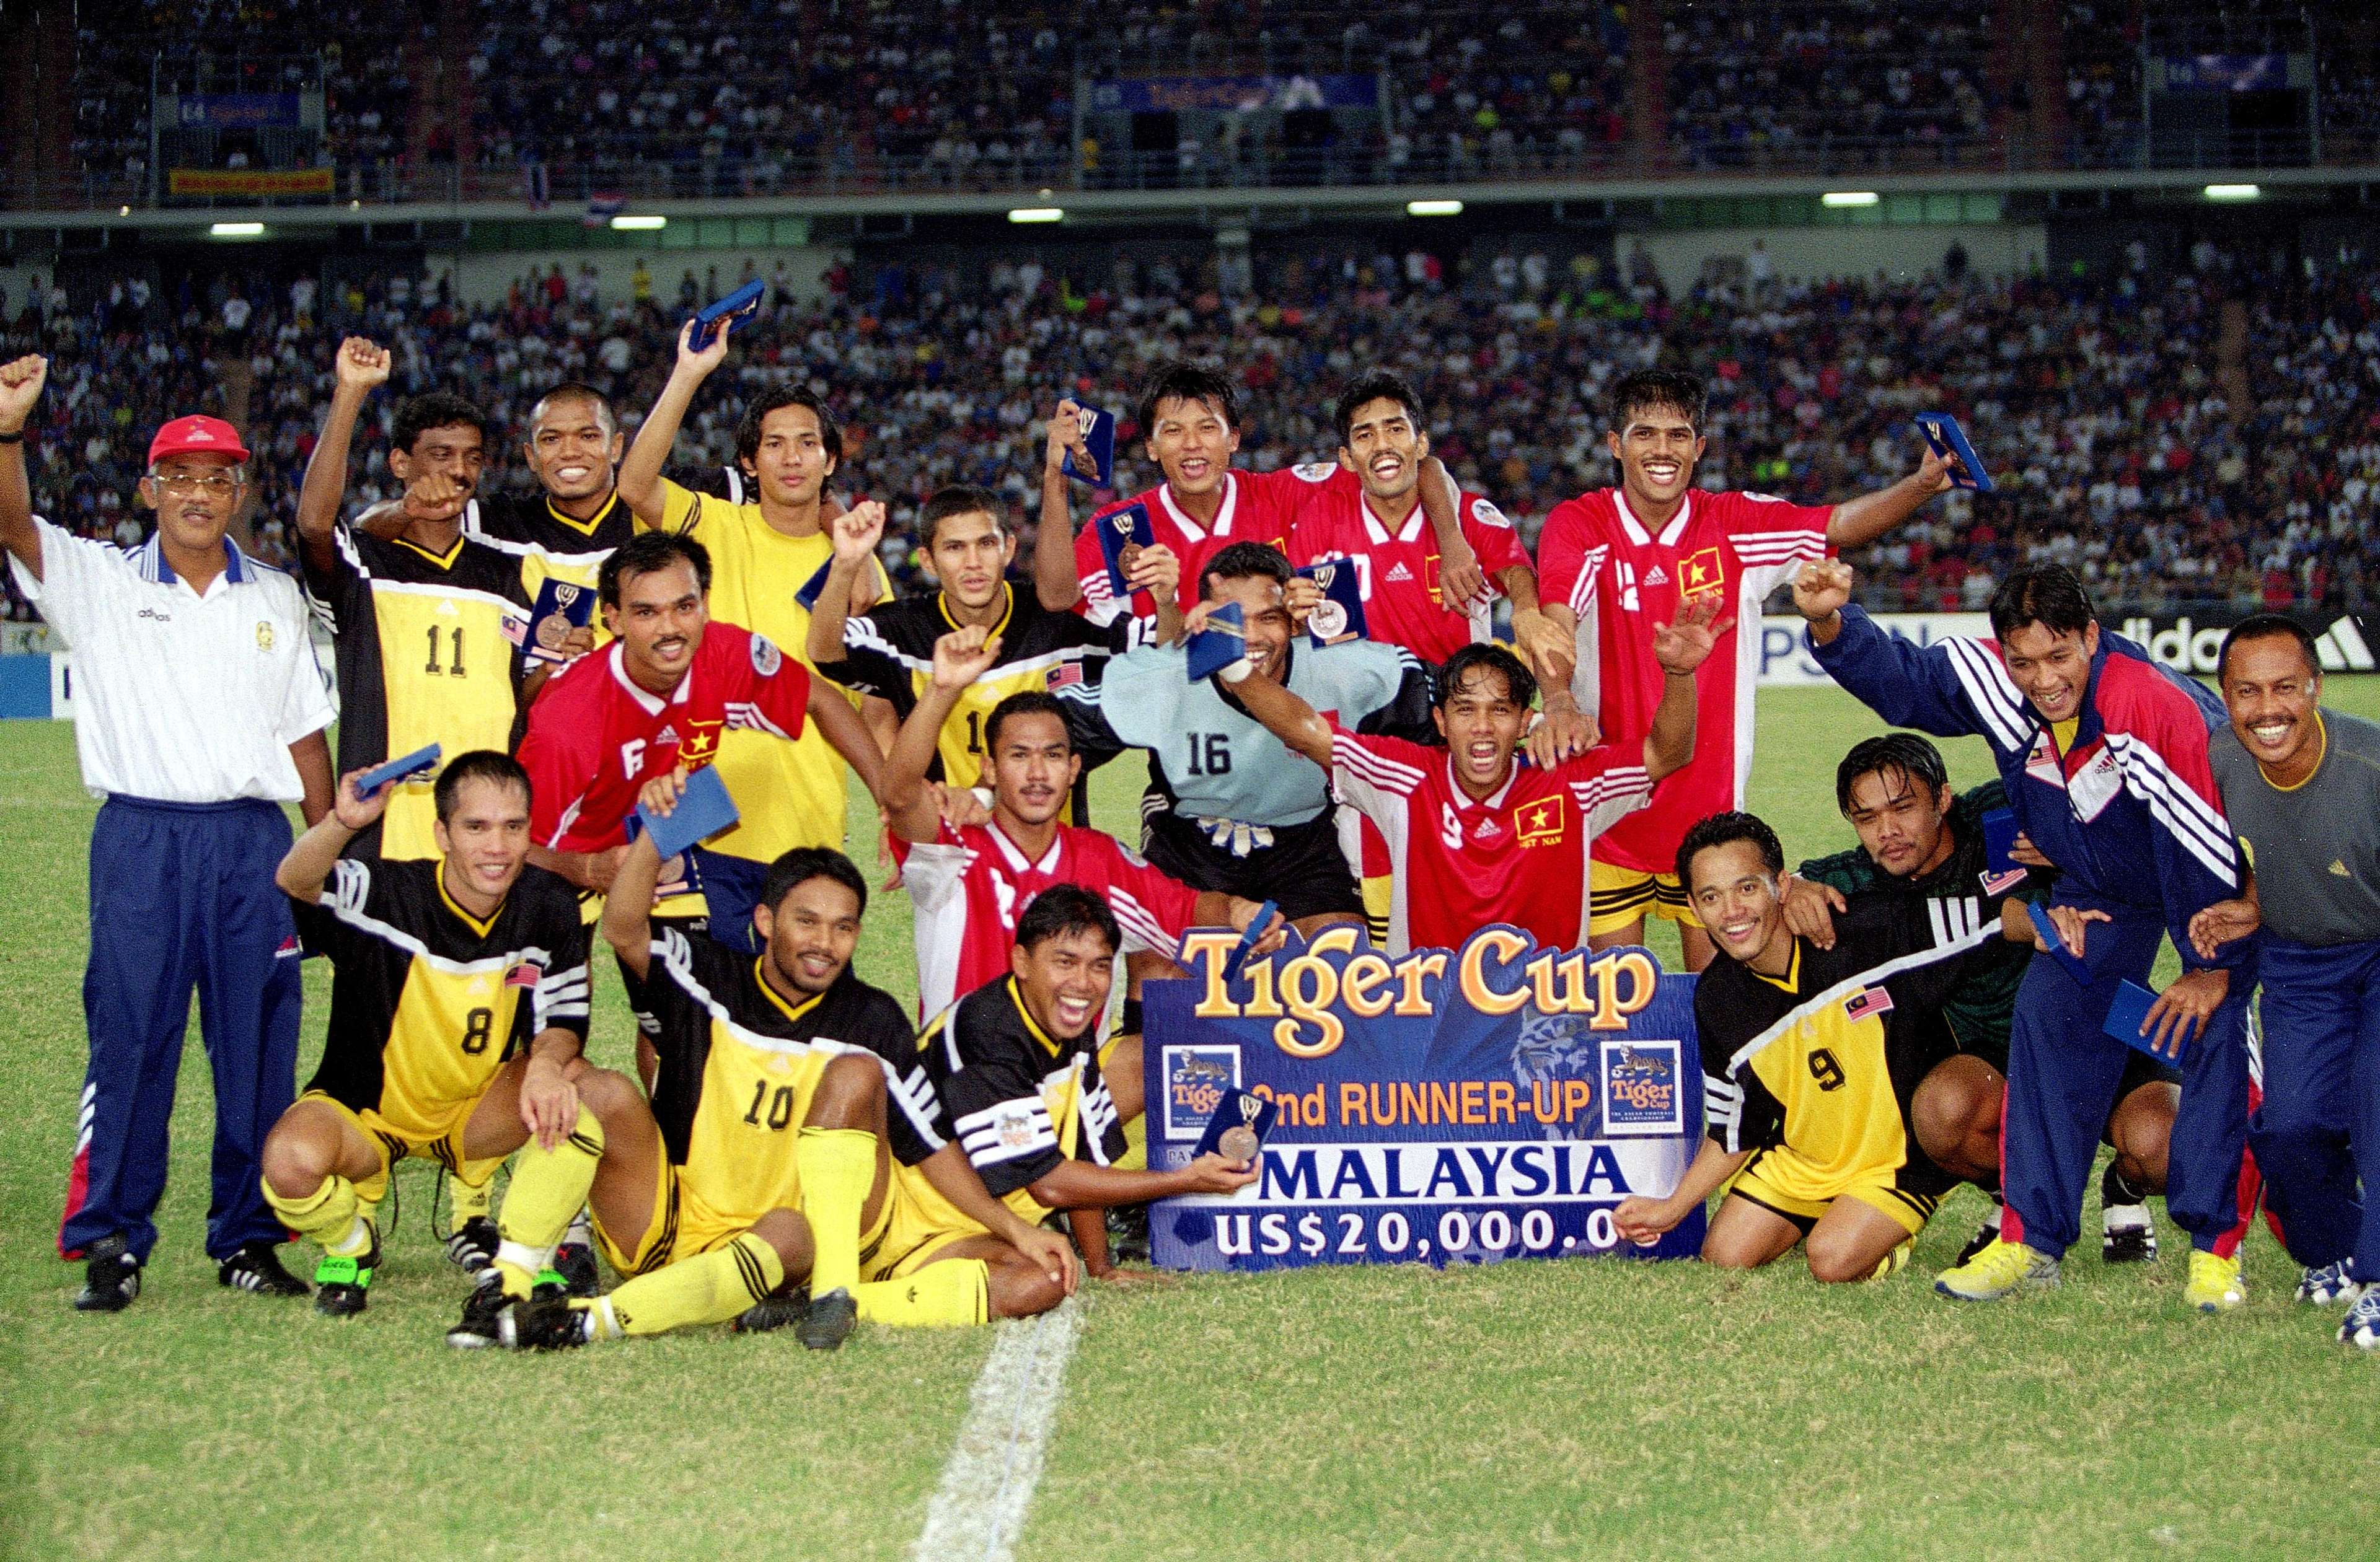 Malaysia team celebrating finishing third in the 2000 AFF Cup